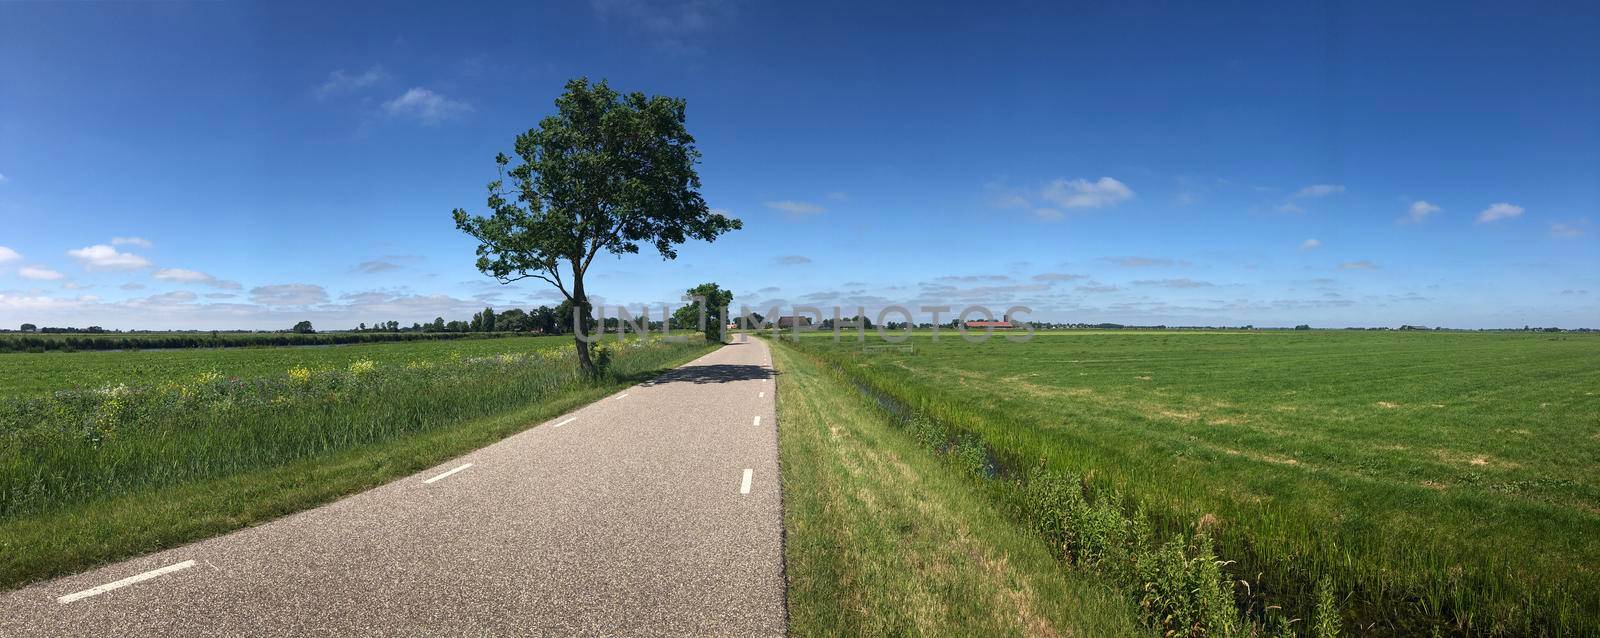 Panorama from a road towards Burdaard in Friesland The Netherlands